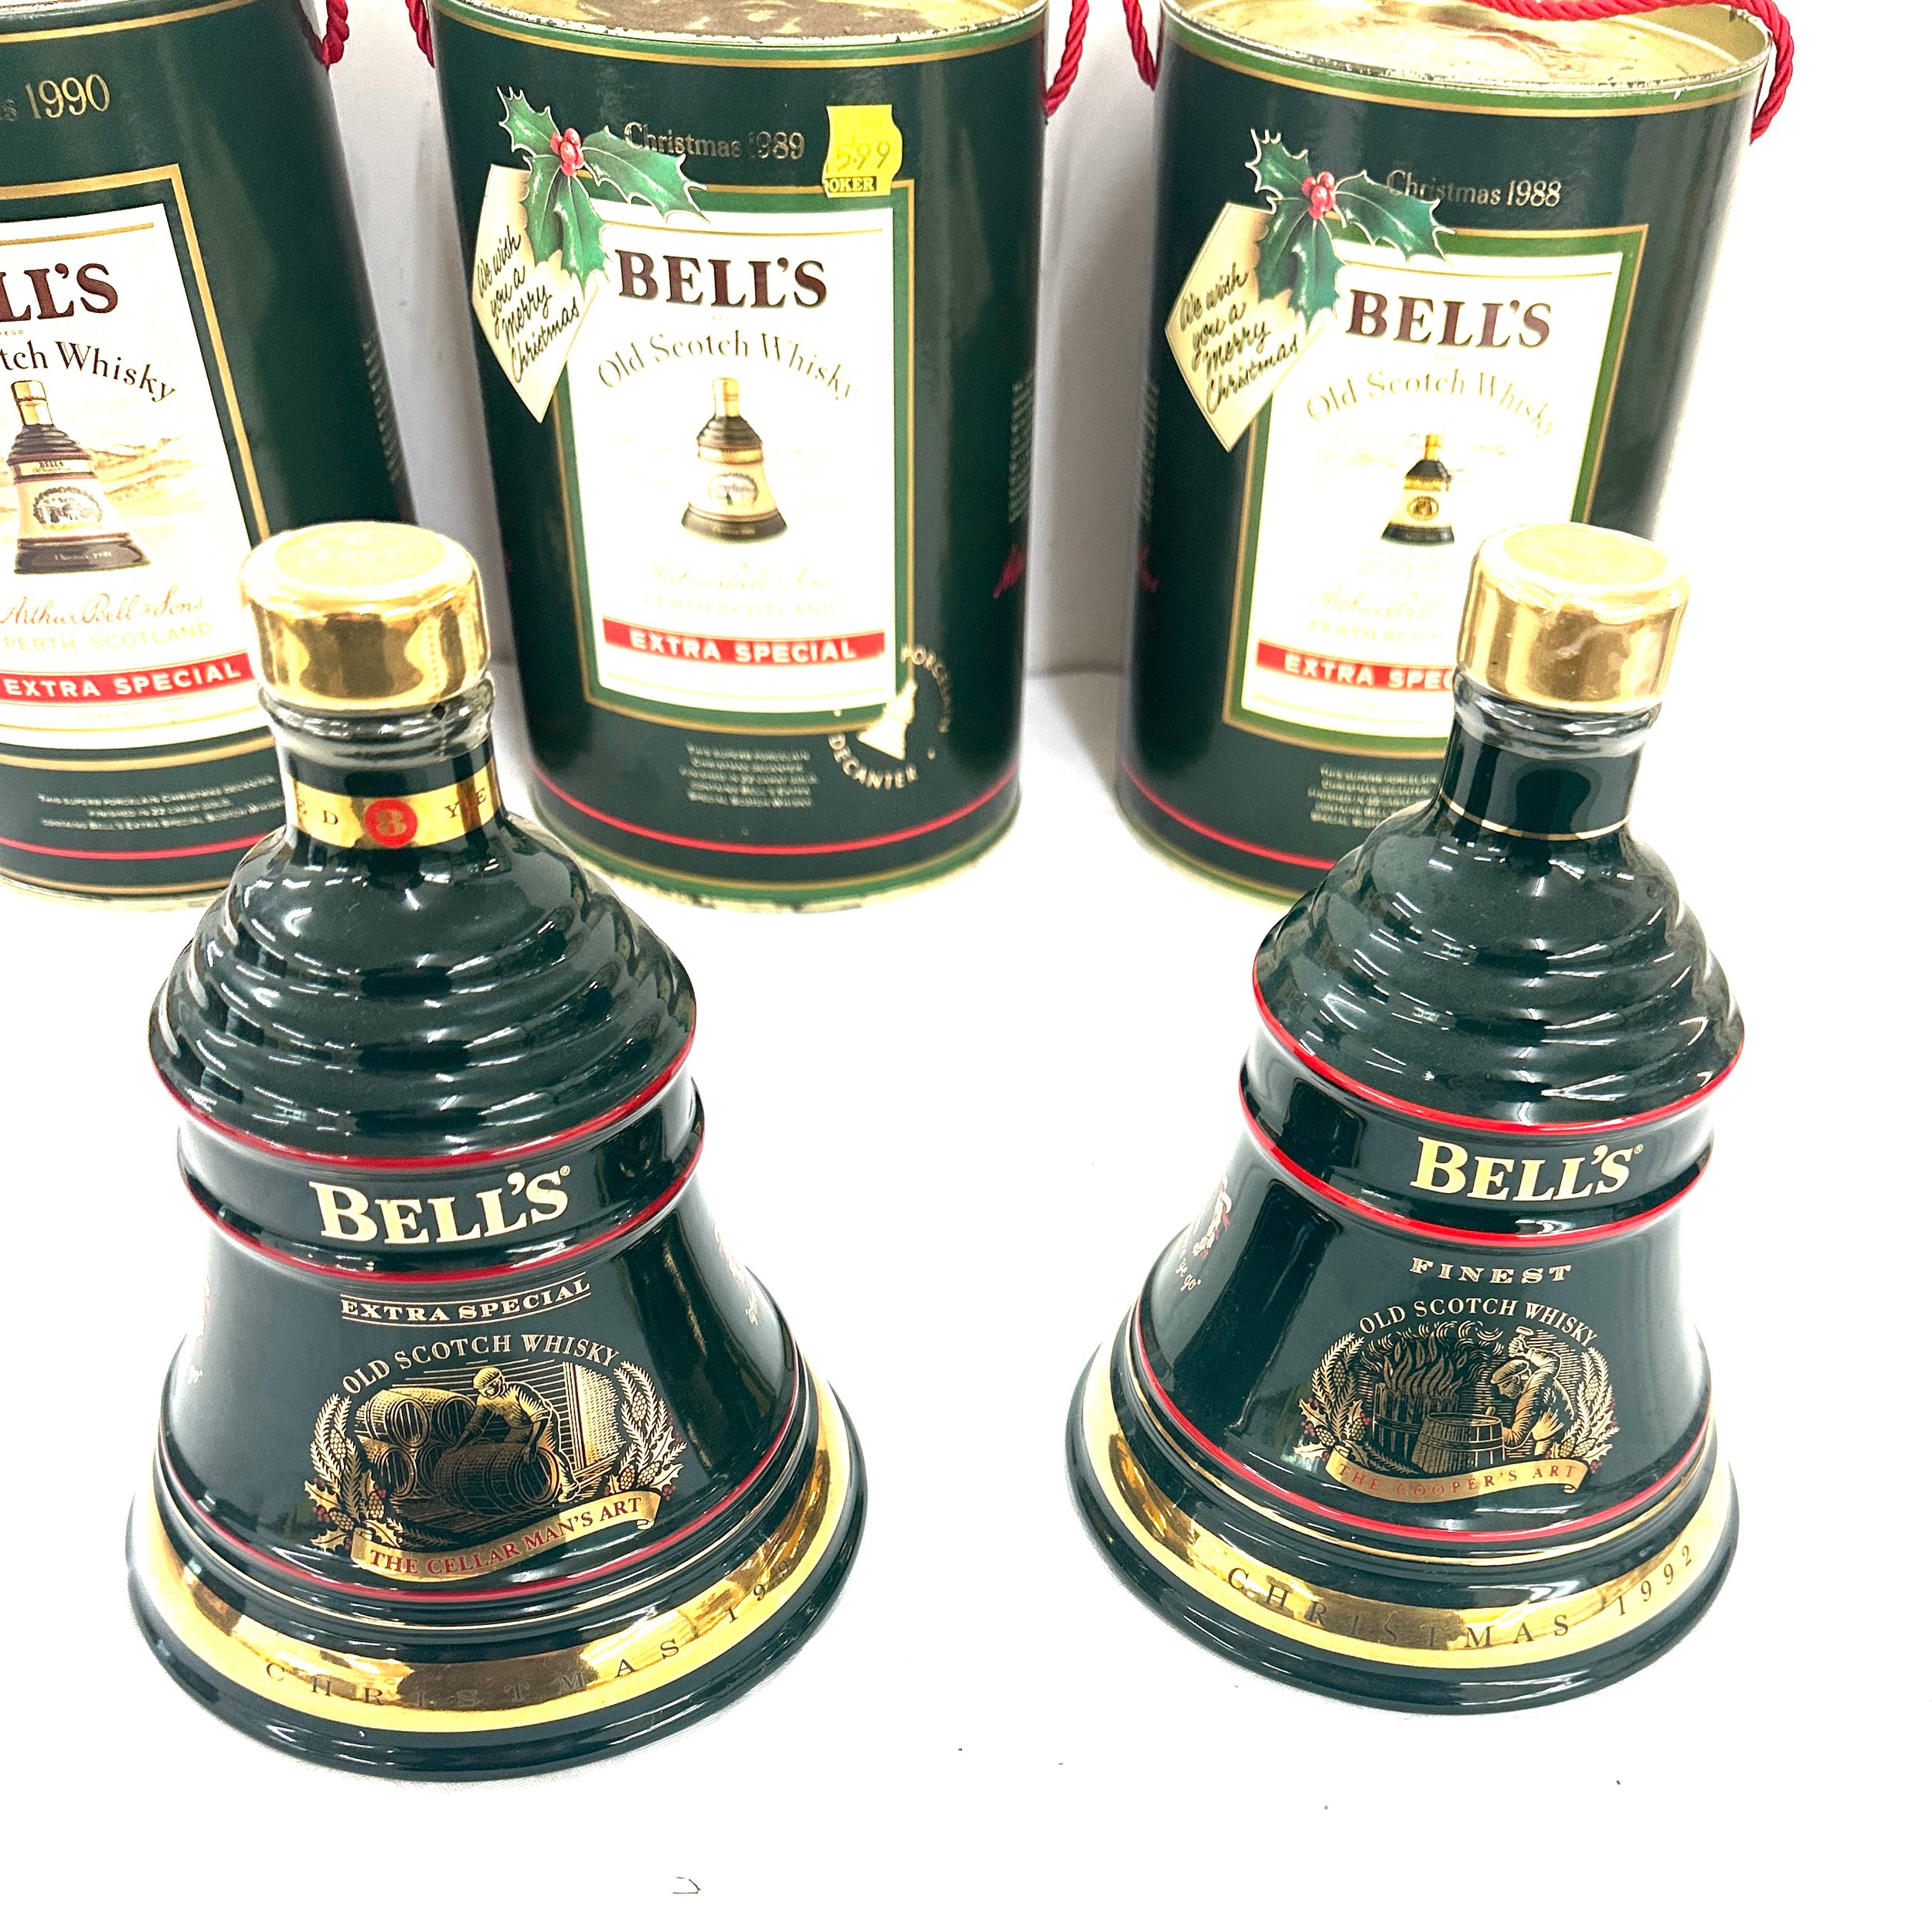 Selection of Bells Old Scotch Whisky Christmas decanters to include Christmas 1990, 1988, 1989, 1992 - Image 6 of 8